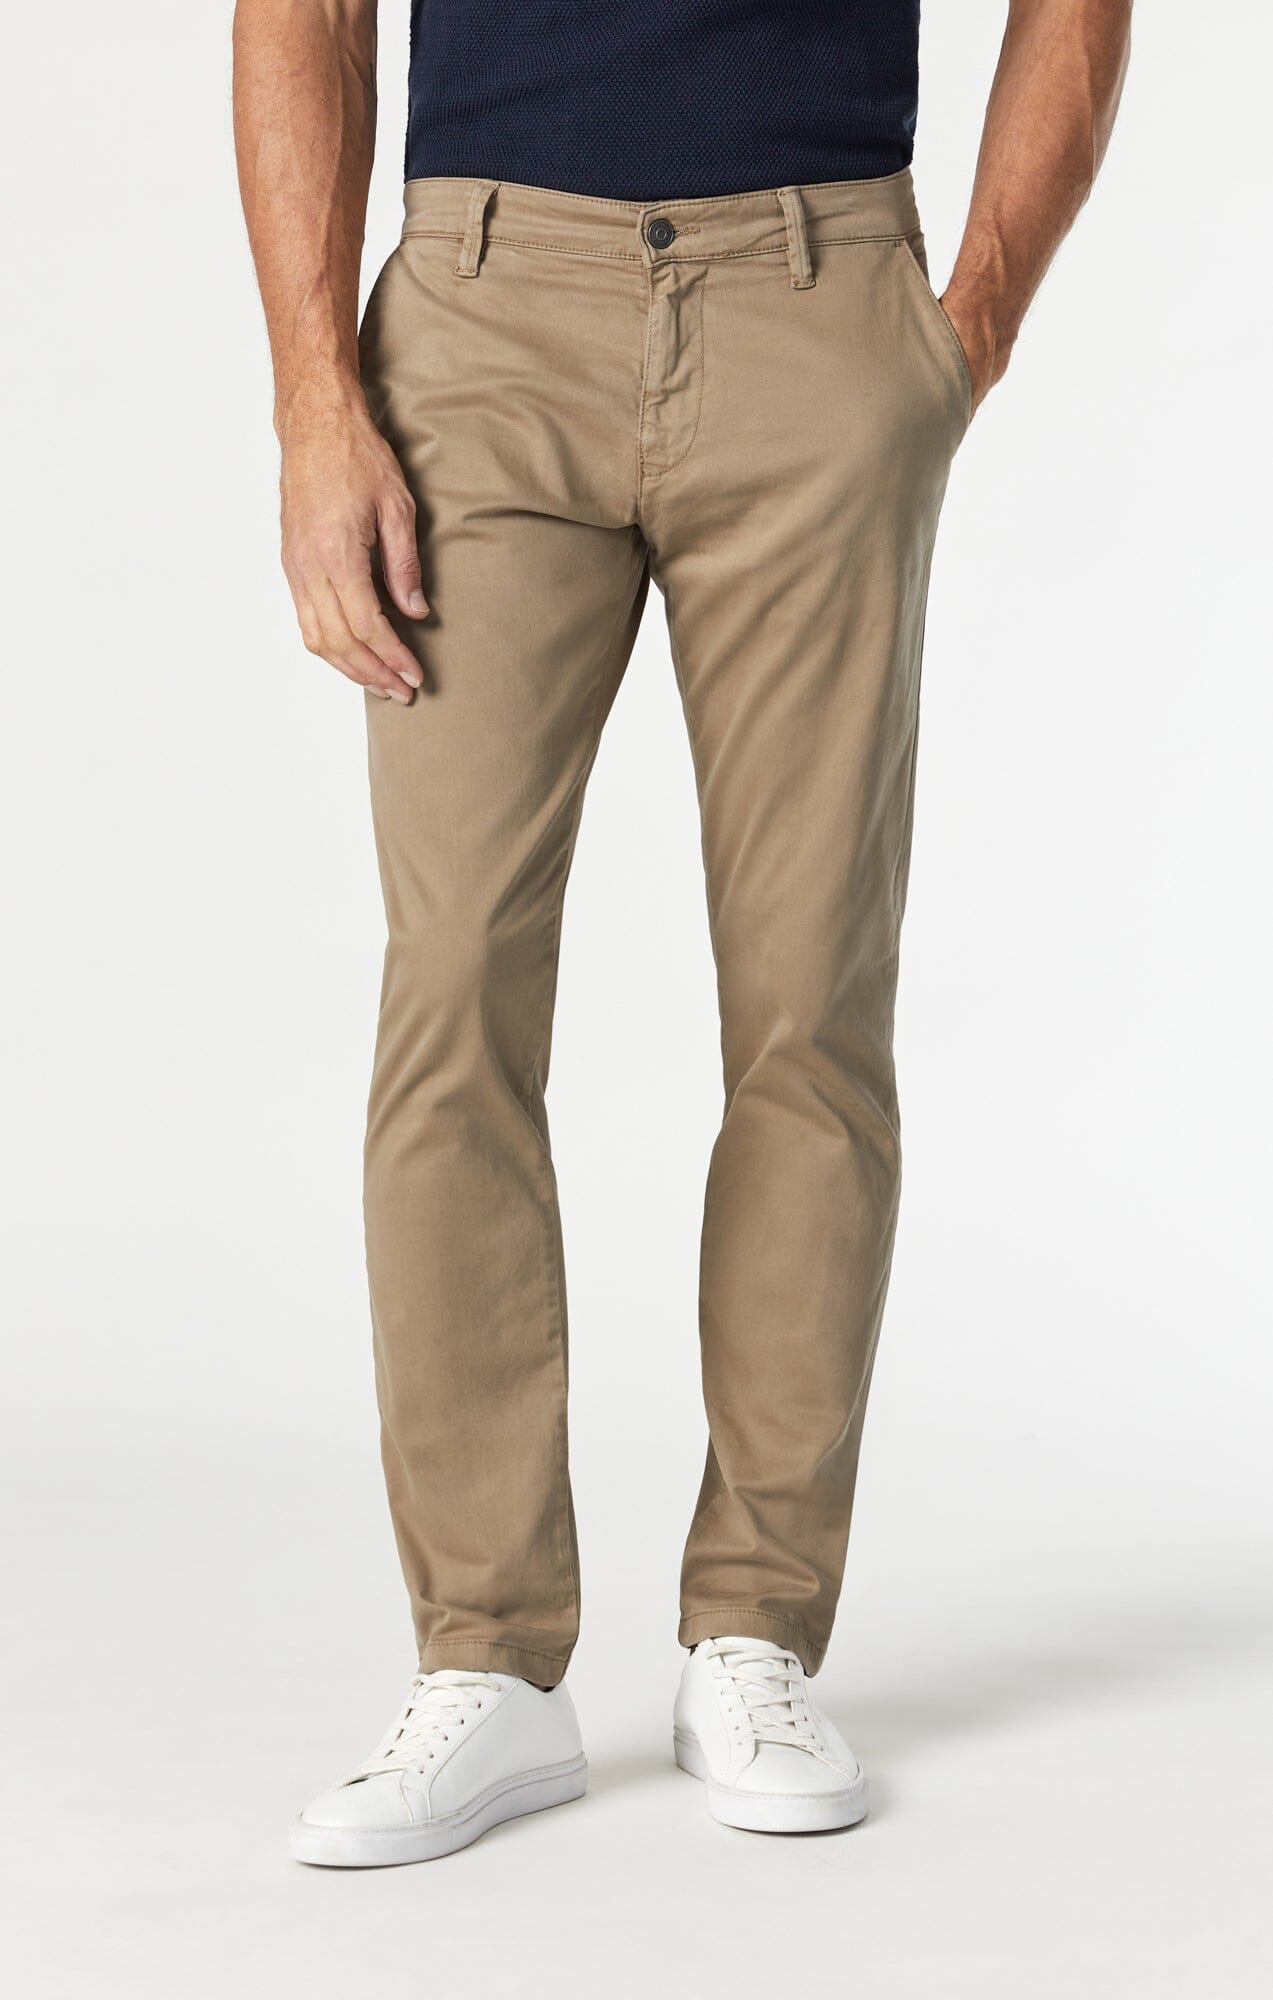 CHINO PANTS HW DMGD | Visvim Official North American Web Store